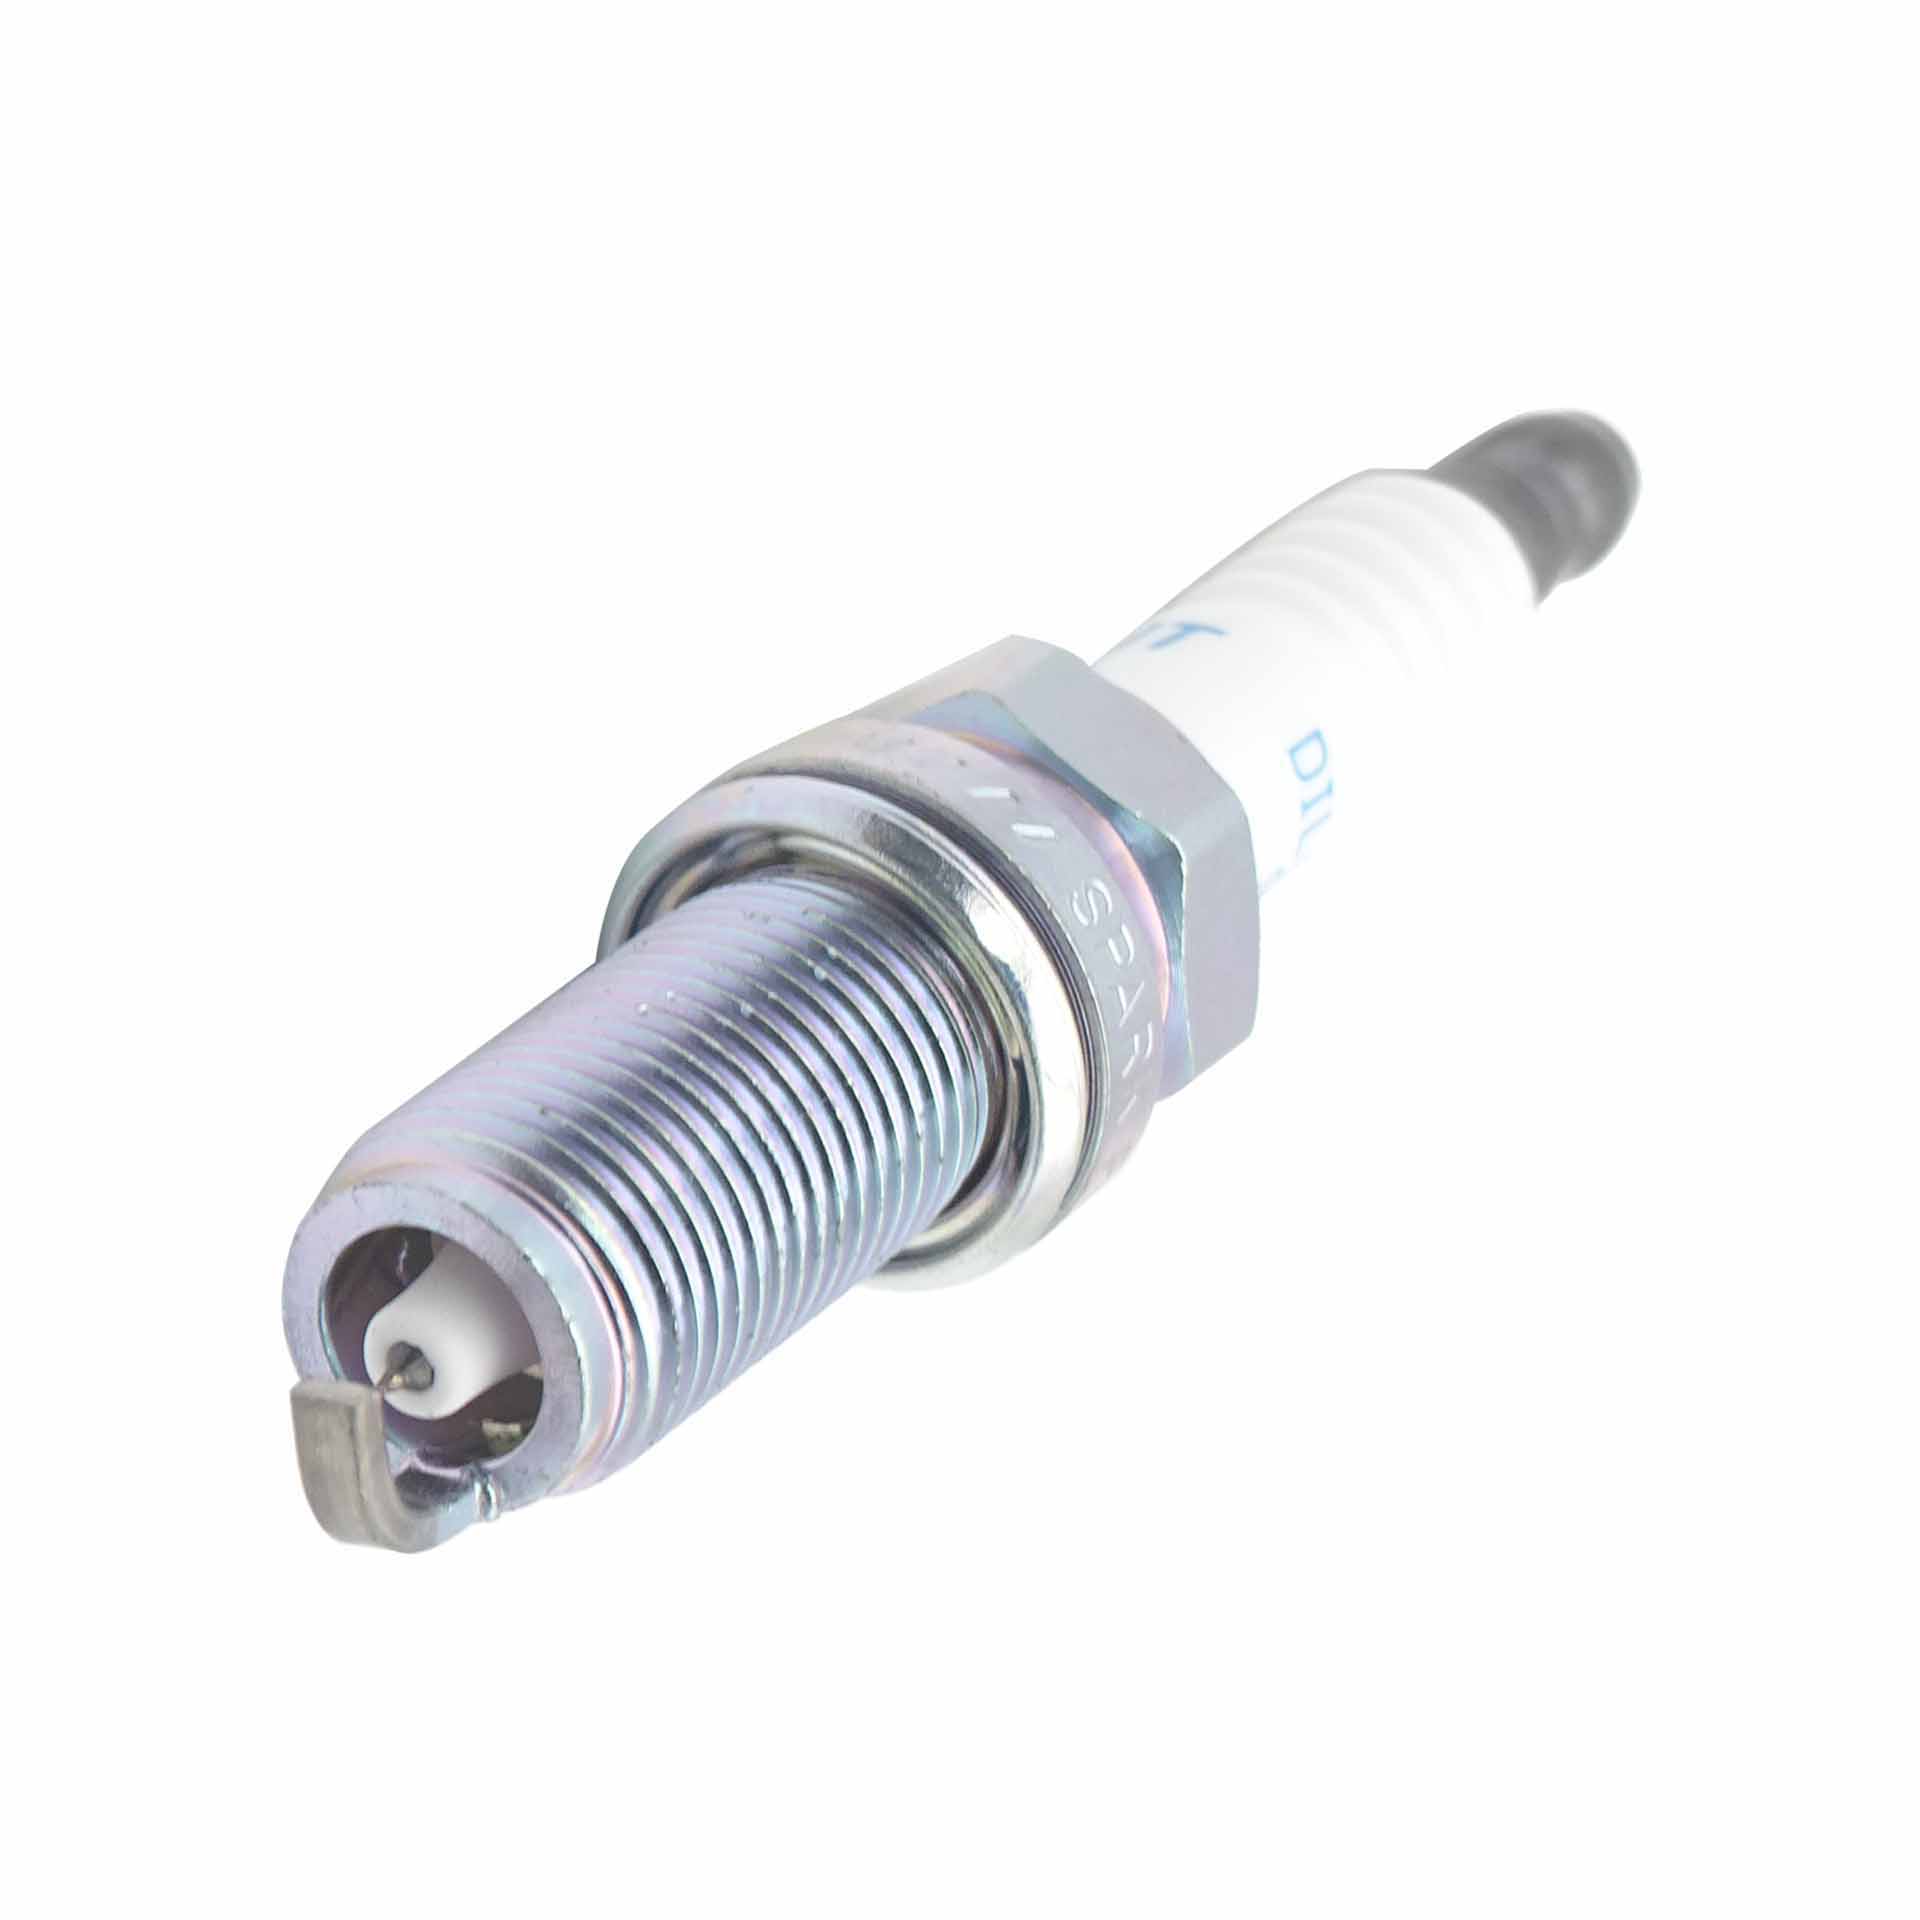 Spark Plug is suitable for Toyota Crown 2015- Highlander 2.0T 2015- OE:90919-01276